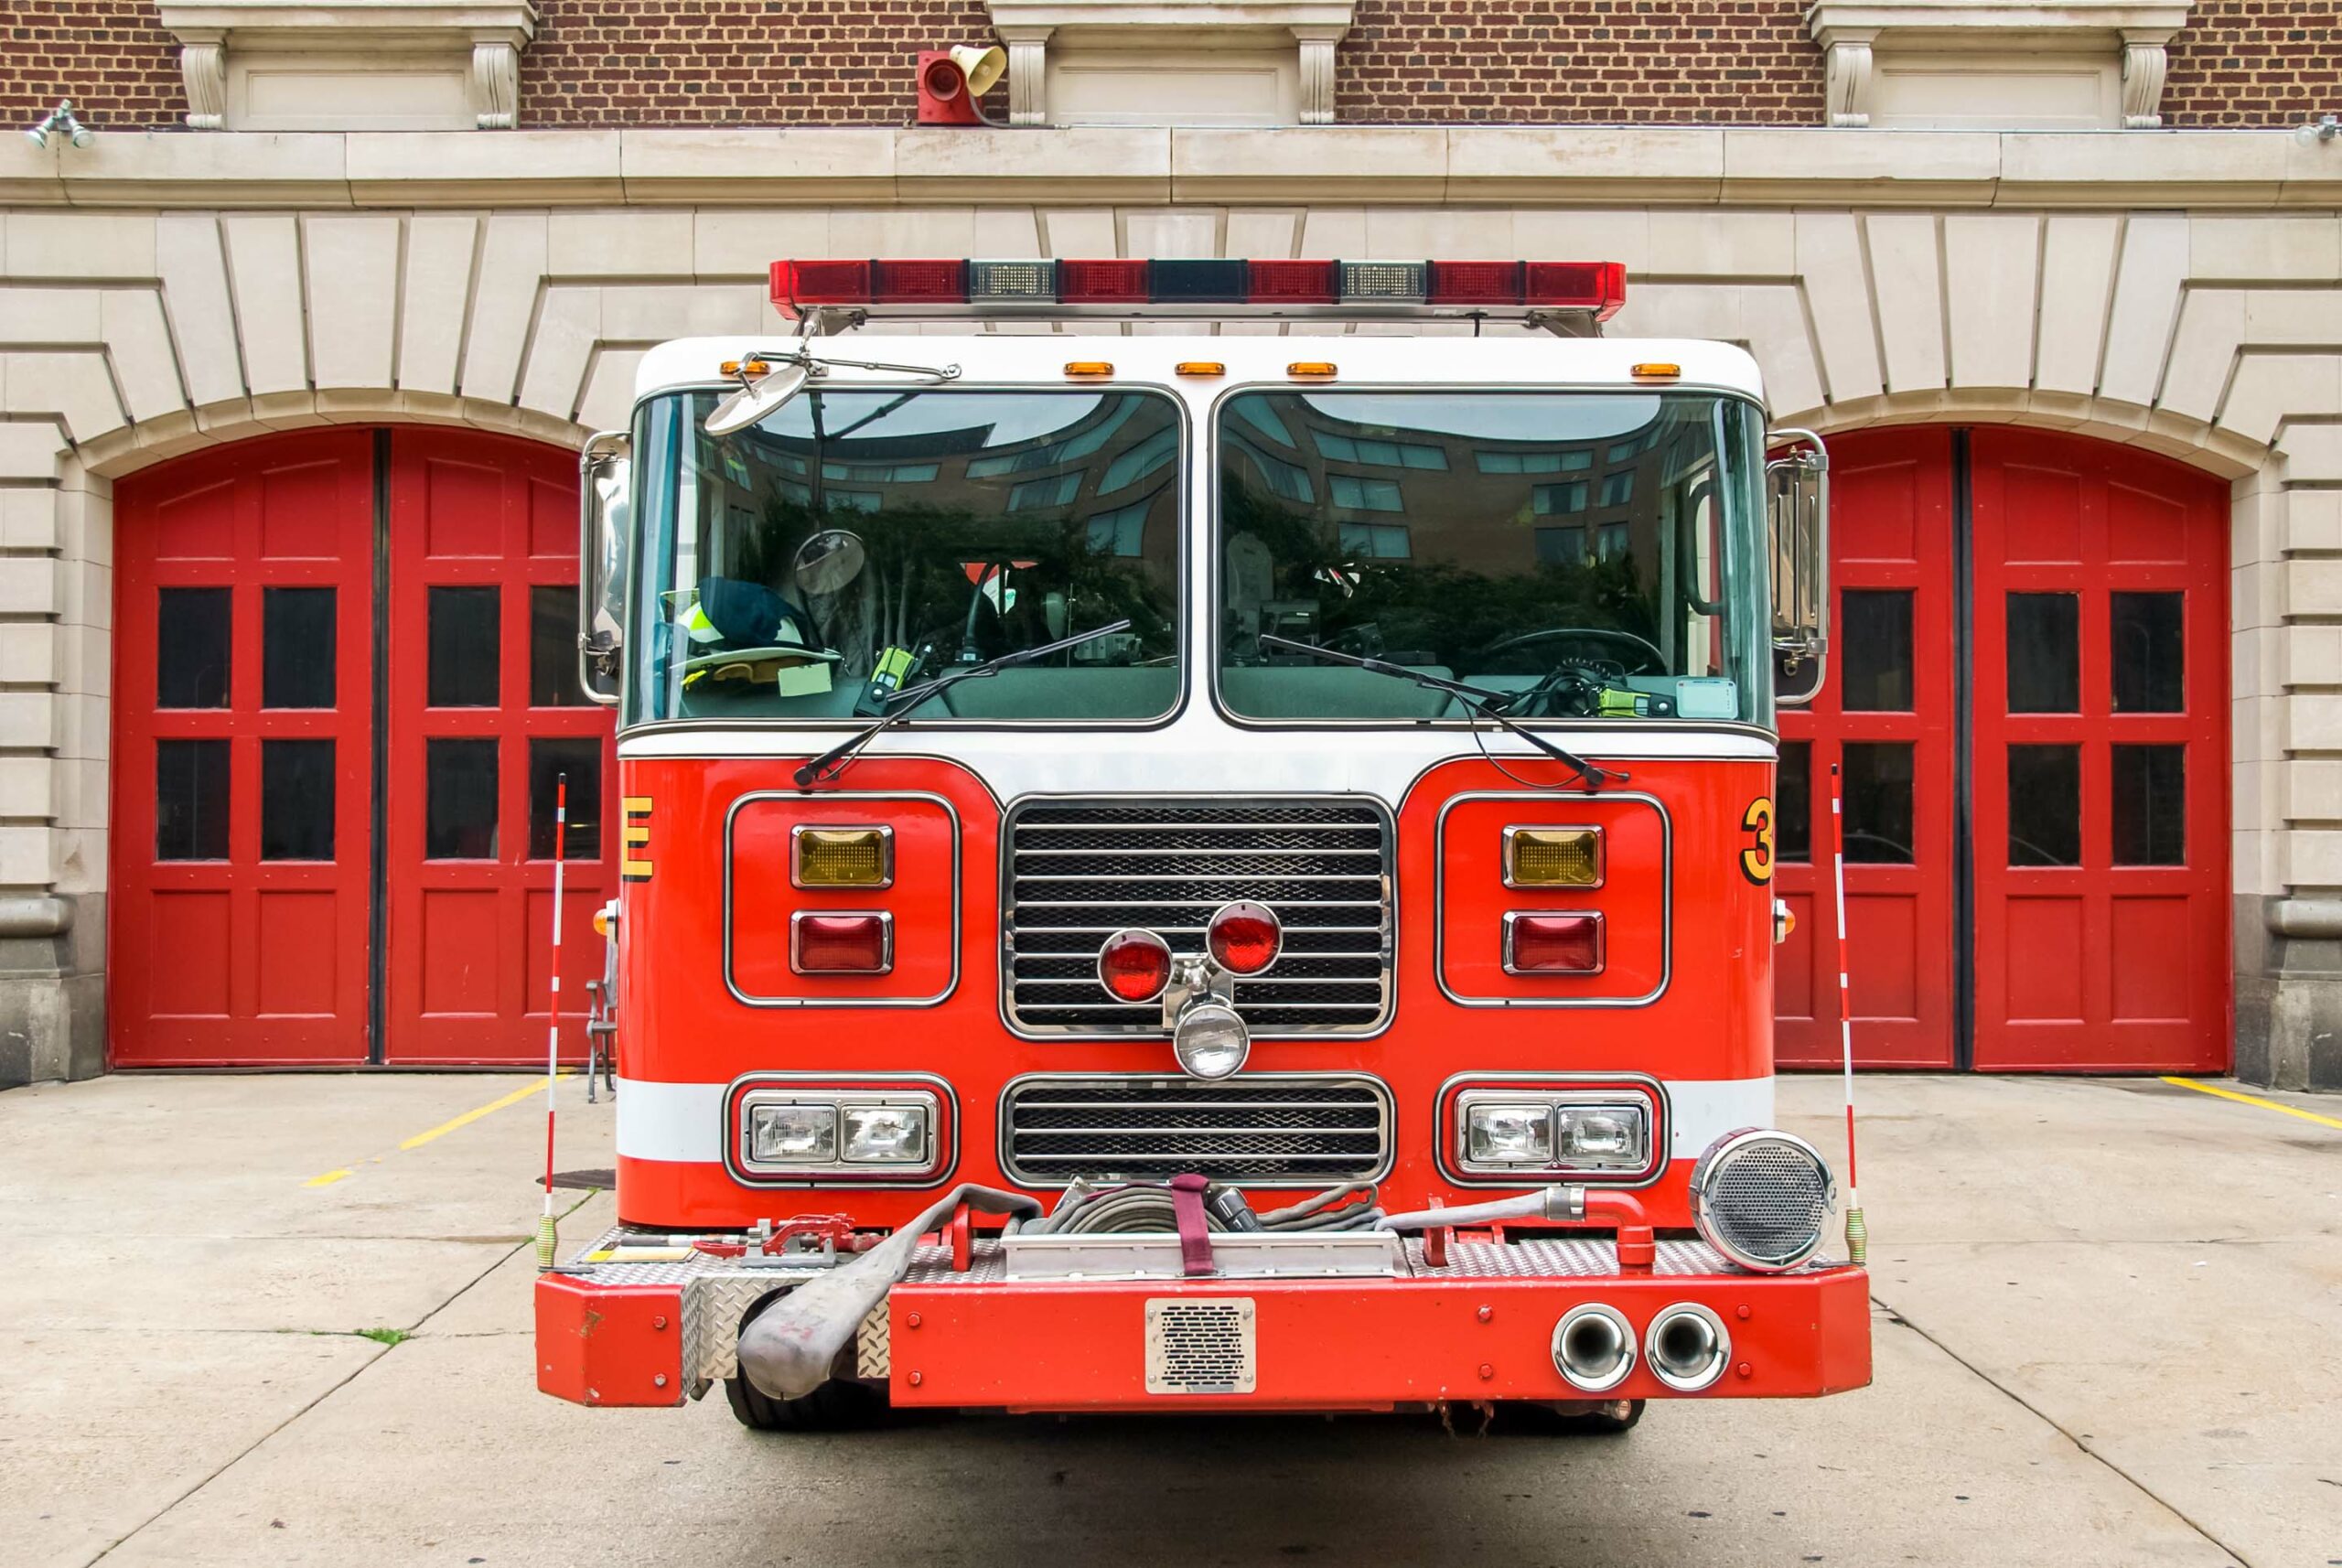 A red and white fire truck is parked directly in front of a fire station with red double doors. The fire truck features various equipment, lights, and hoses, with a symmetrical and bold front design. The building behind has beige stone and brick architecture.